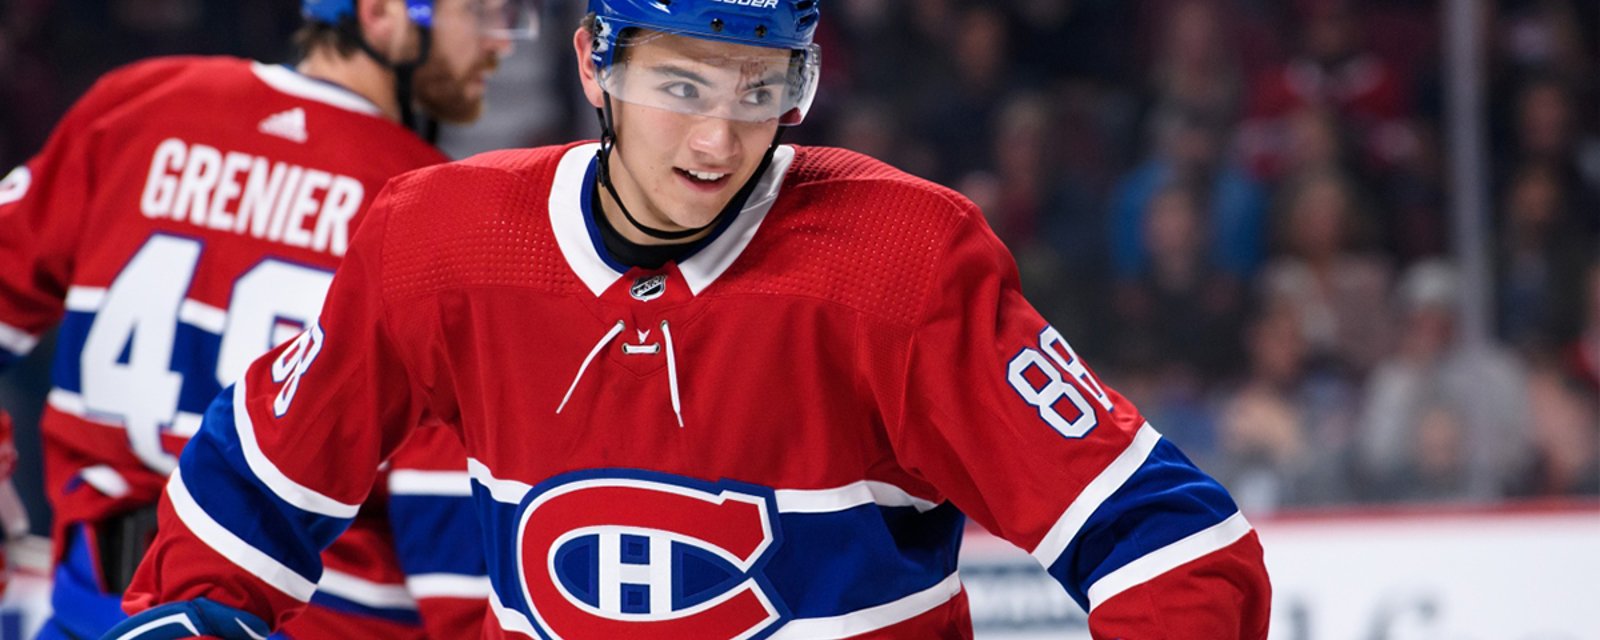 Habs top prospect named captain of Team Canada